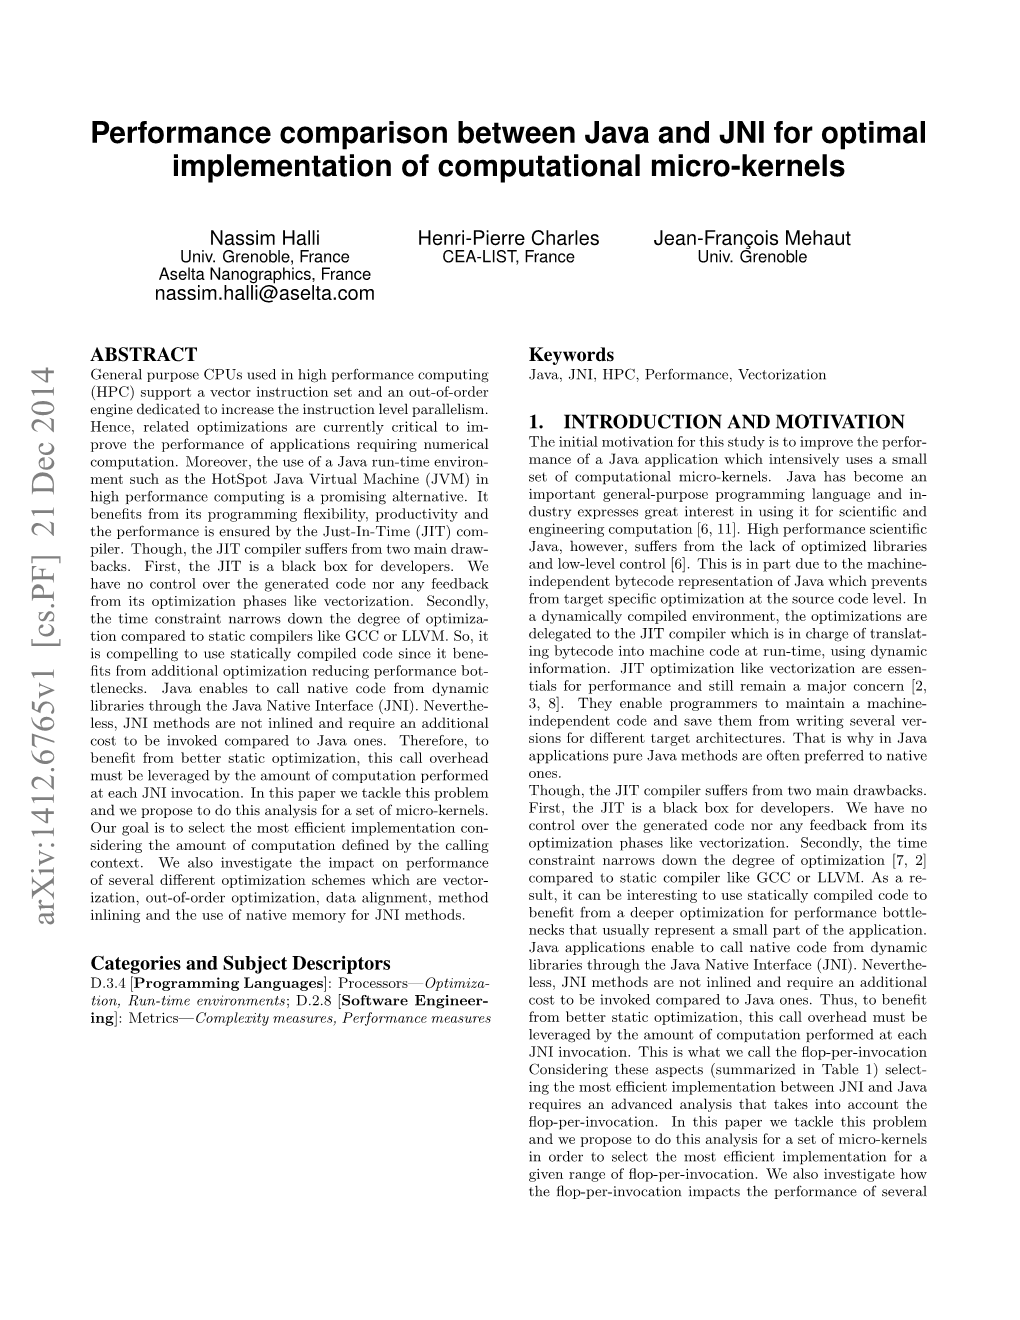 Performance Comparison Between Java and JNI for Optimal Implementation of Computational Micro-Kernels